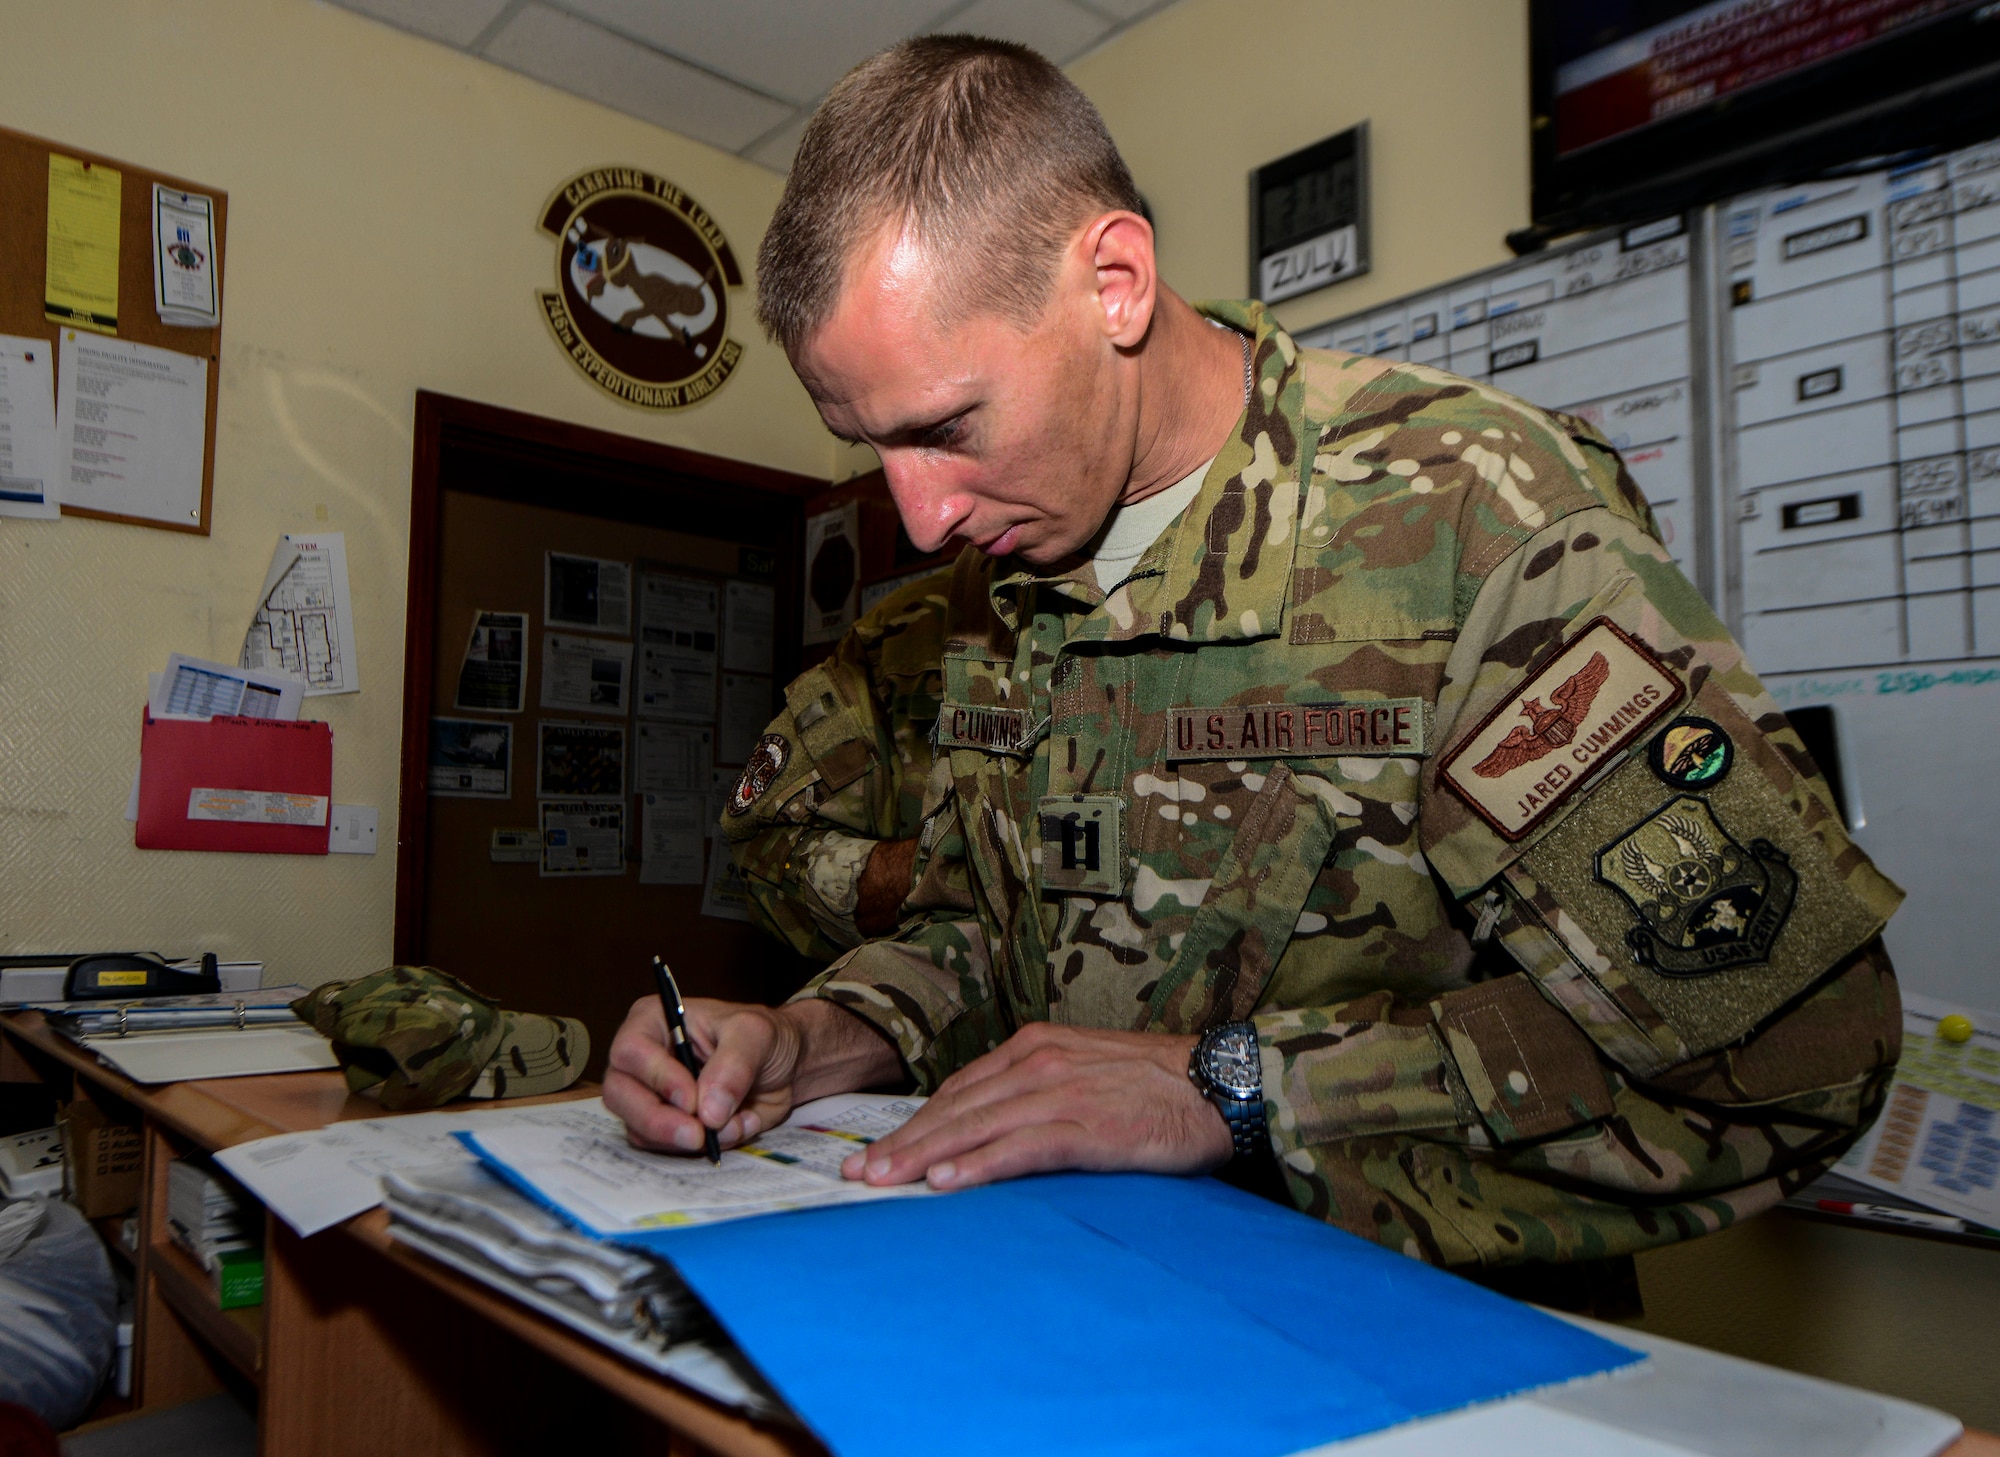 Capt. Jared Cummings, 746th Expeditionary Airlift Squadron aircraft commander, reviews the crew resource management paperwork prior to conducting a mission on a C-130H Hercules July 28, 2016, at Al Udeid Air Base, Qatar. Airmen from the 746th EAS conduct intratheater airlifts, medical evacuation and airdrop missions throughout the U.S. Air Forces Central Command’s area of responsibility in support of Operation Inherent Resolve and Operations Freedom’s Sentinel. (U.S. Air Force photo/Senior Airman Janelle Patiño/Released)